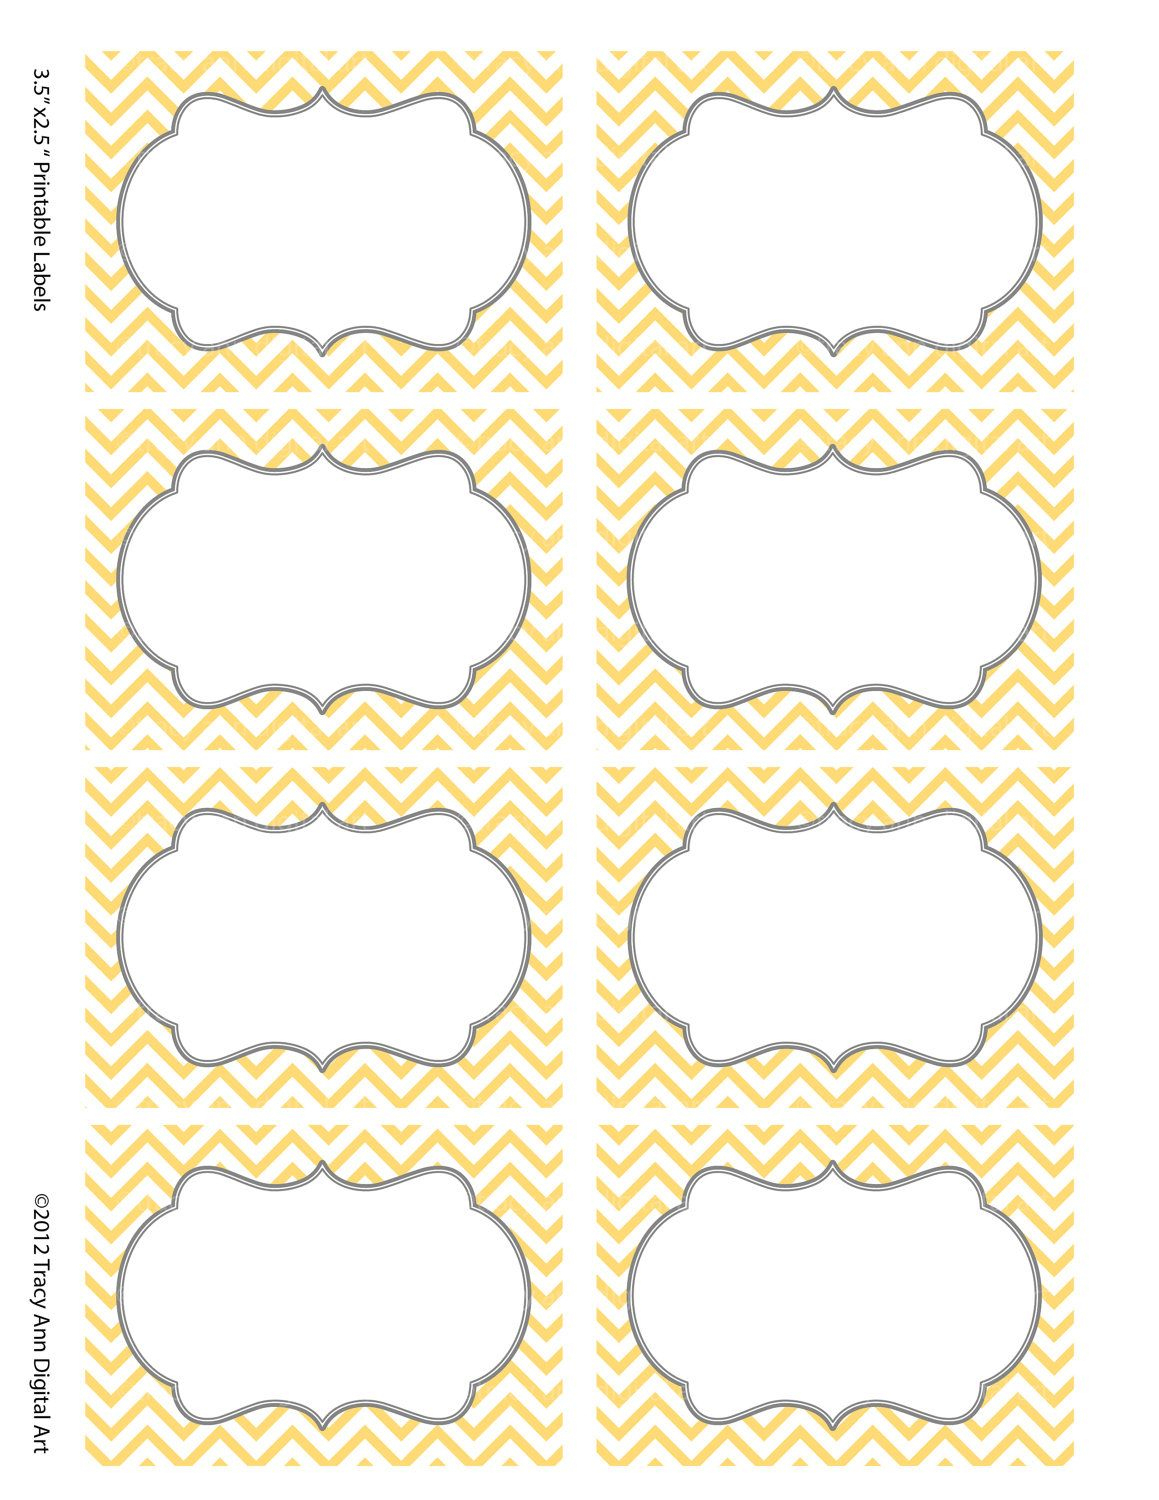 Chevron Labels Print Your Own Labels Yellow And Grey. $5.00, Via - Free Printable Chevron Labels